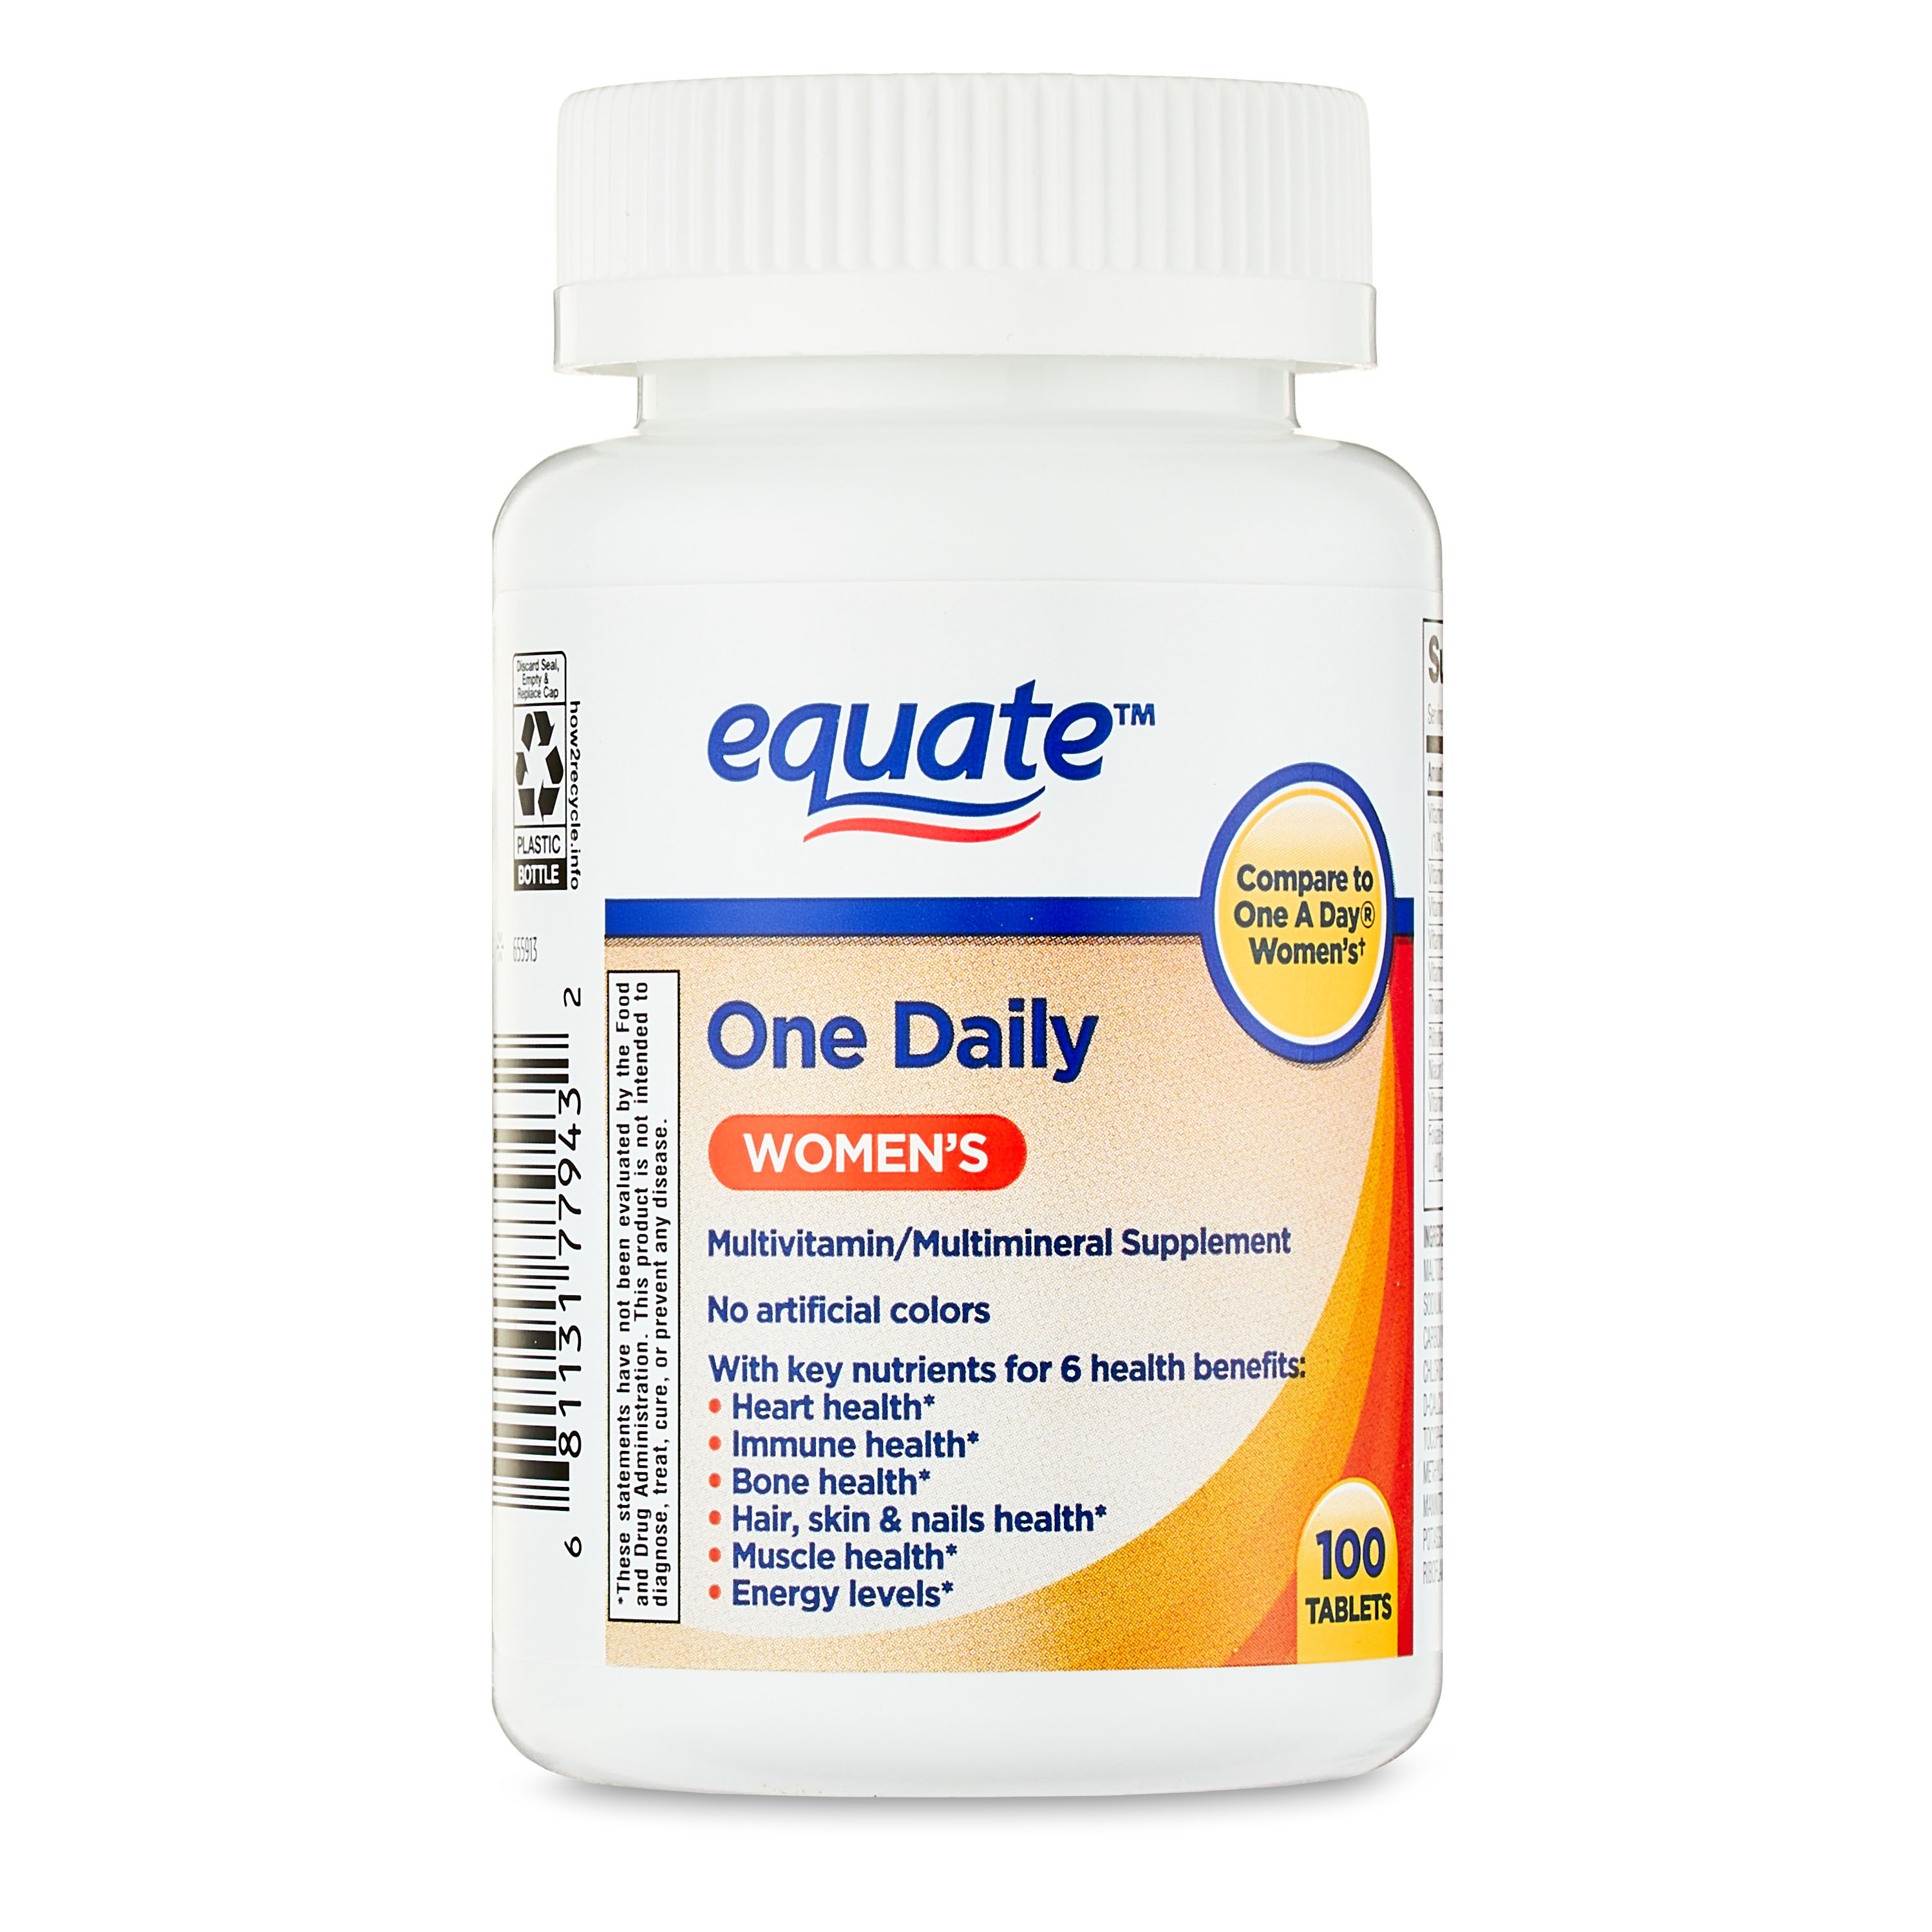 Equate One Daily Women's Tablets Multivitamin/Multimineral Supplement, 100 Count - image 1 of 10